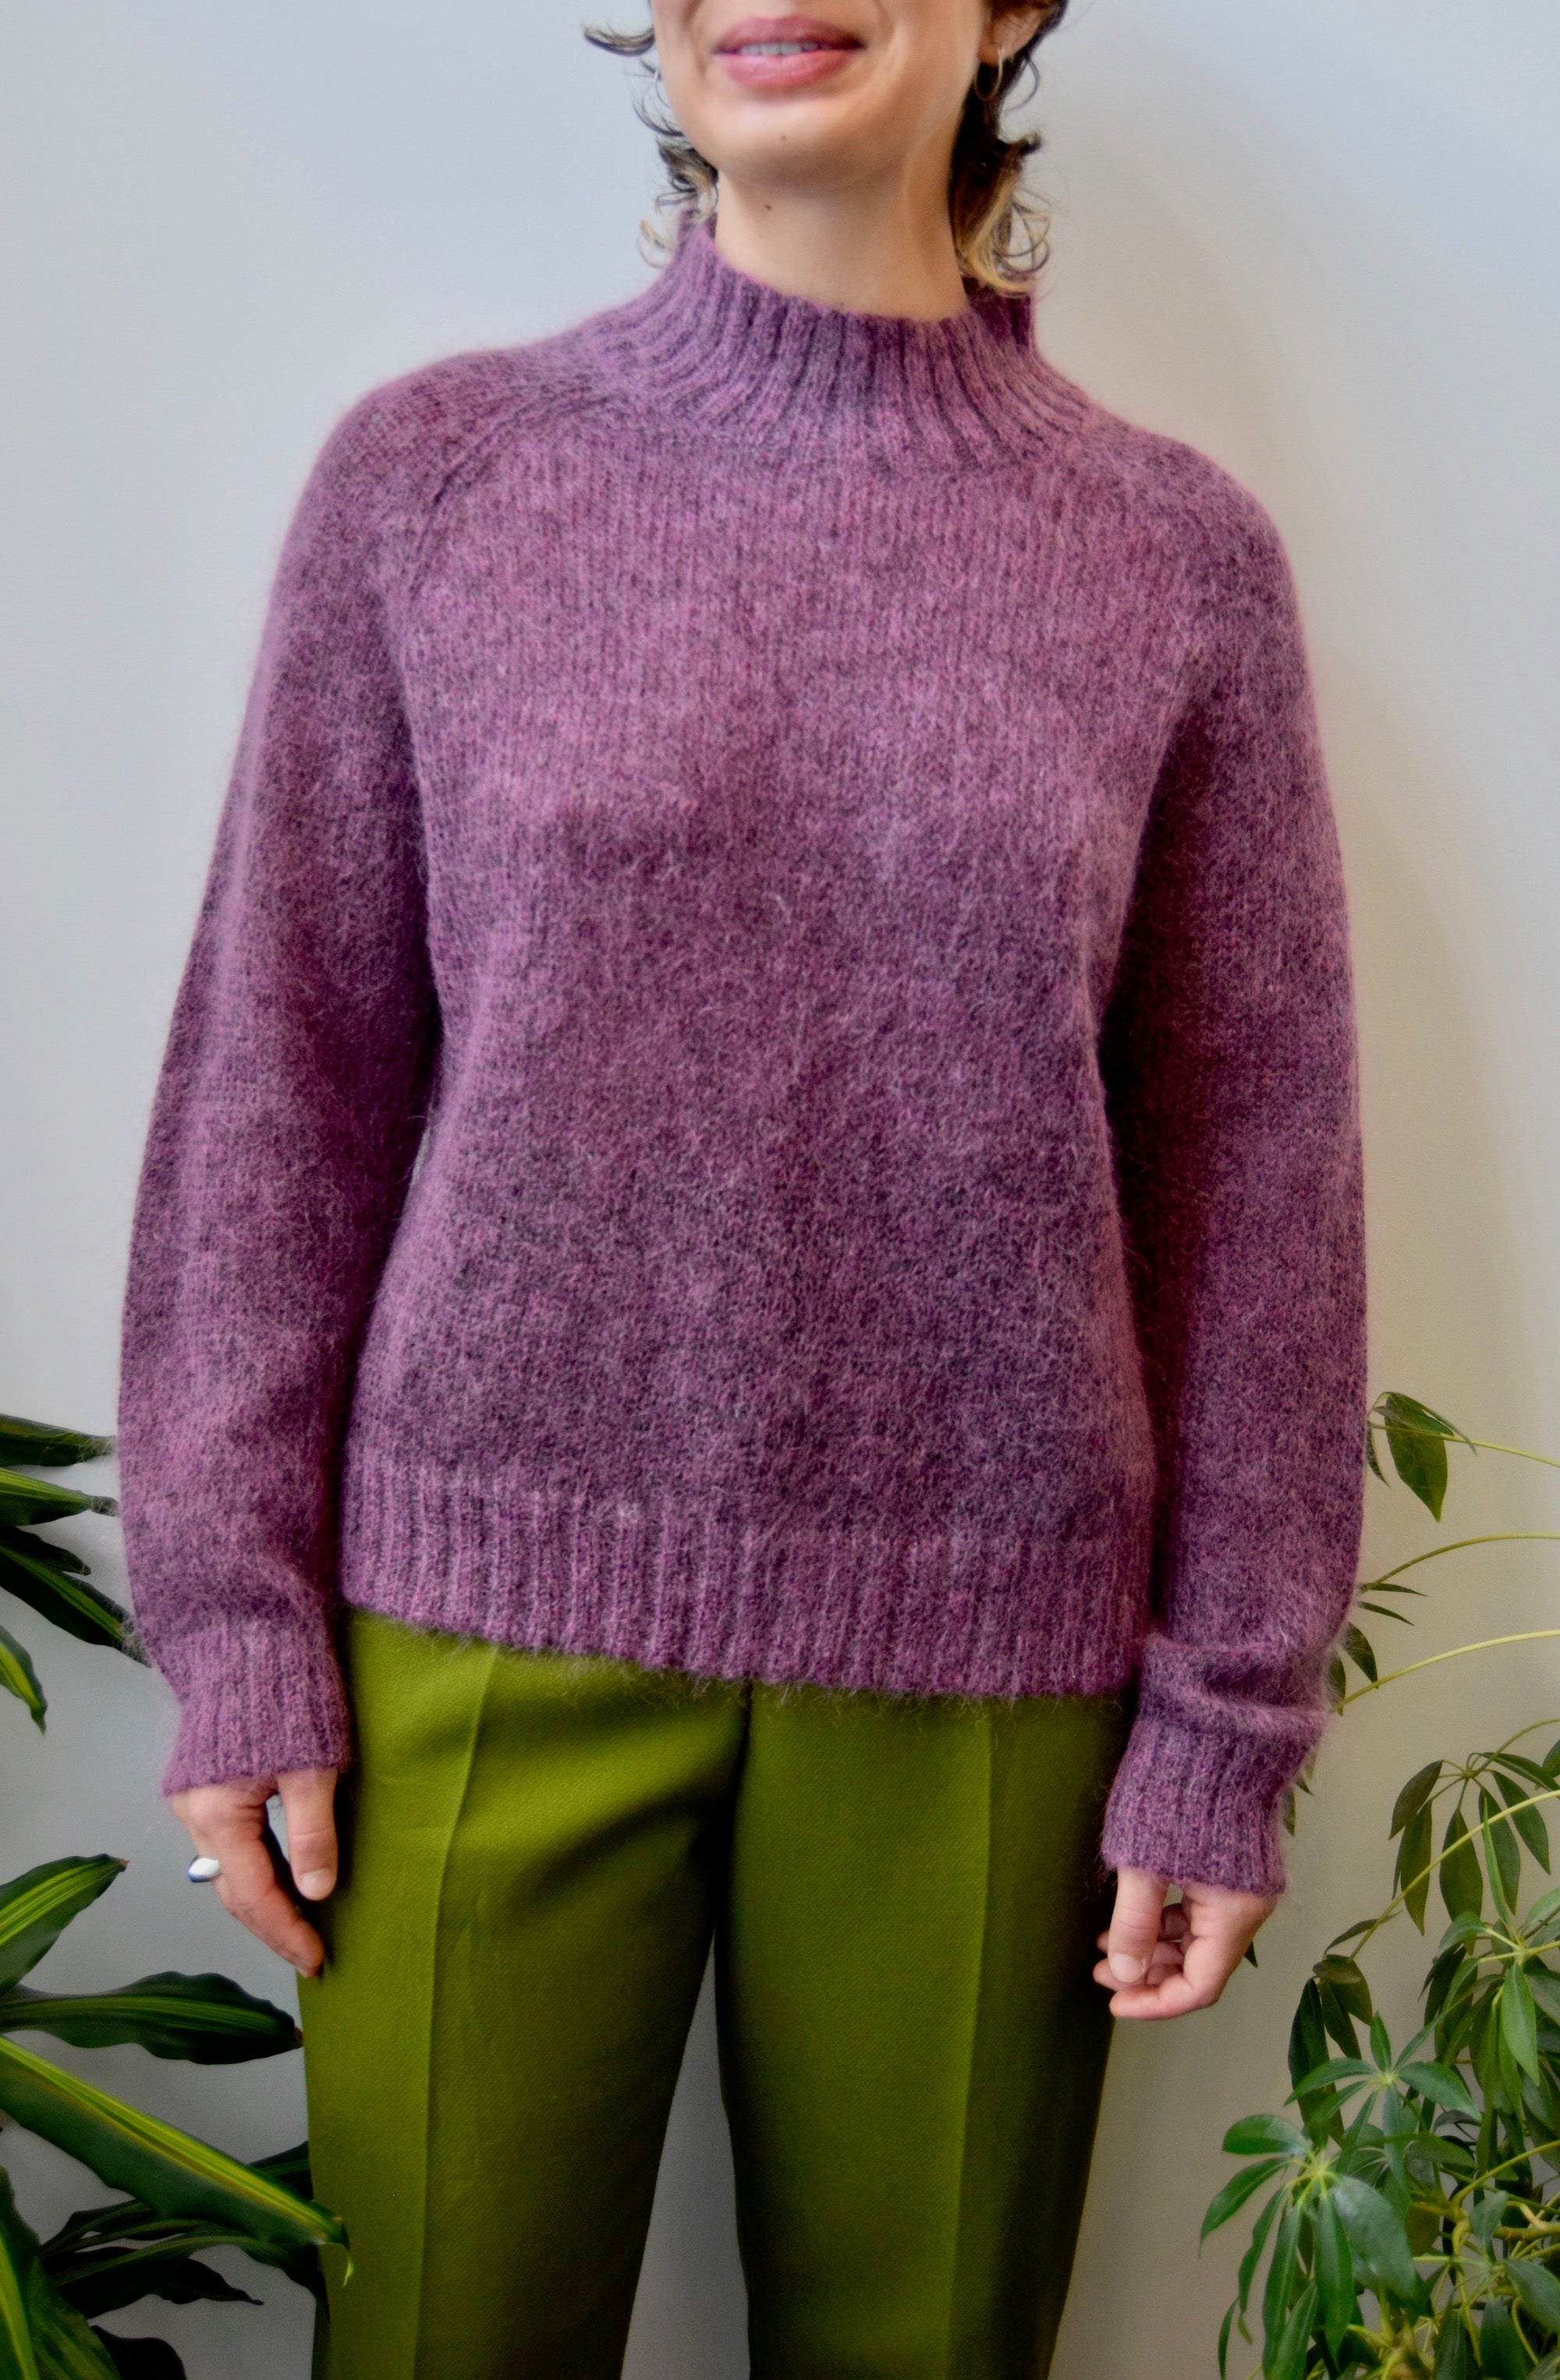 Welches Mohair Sweater